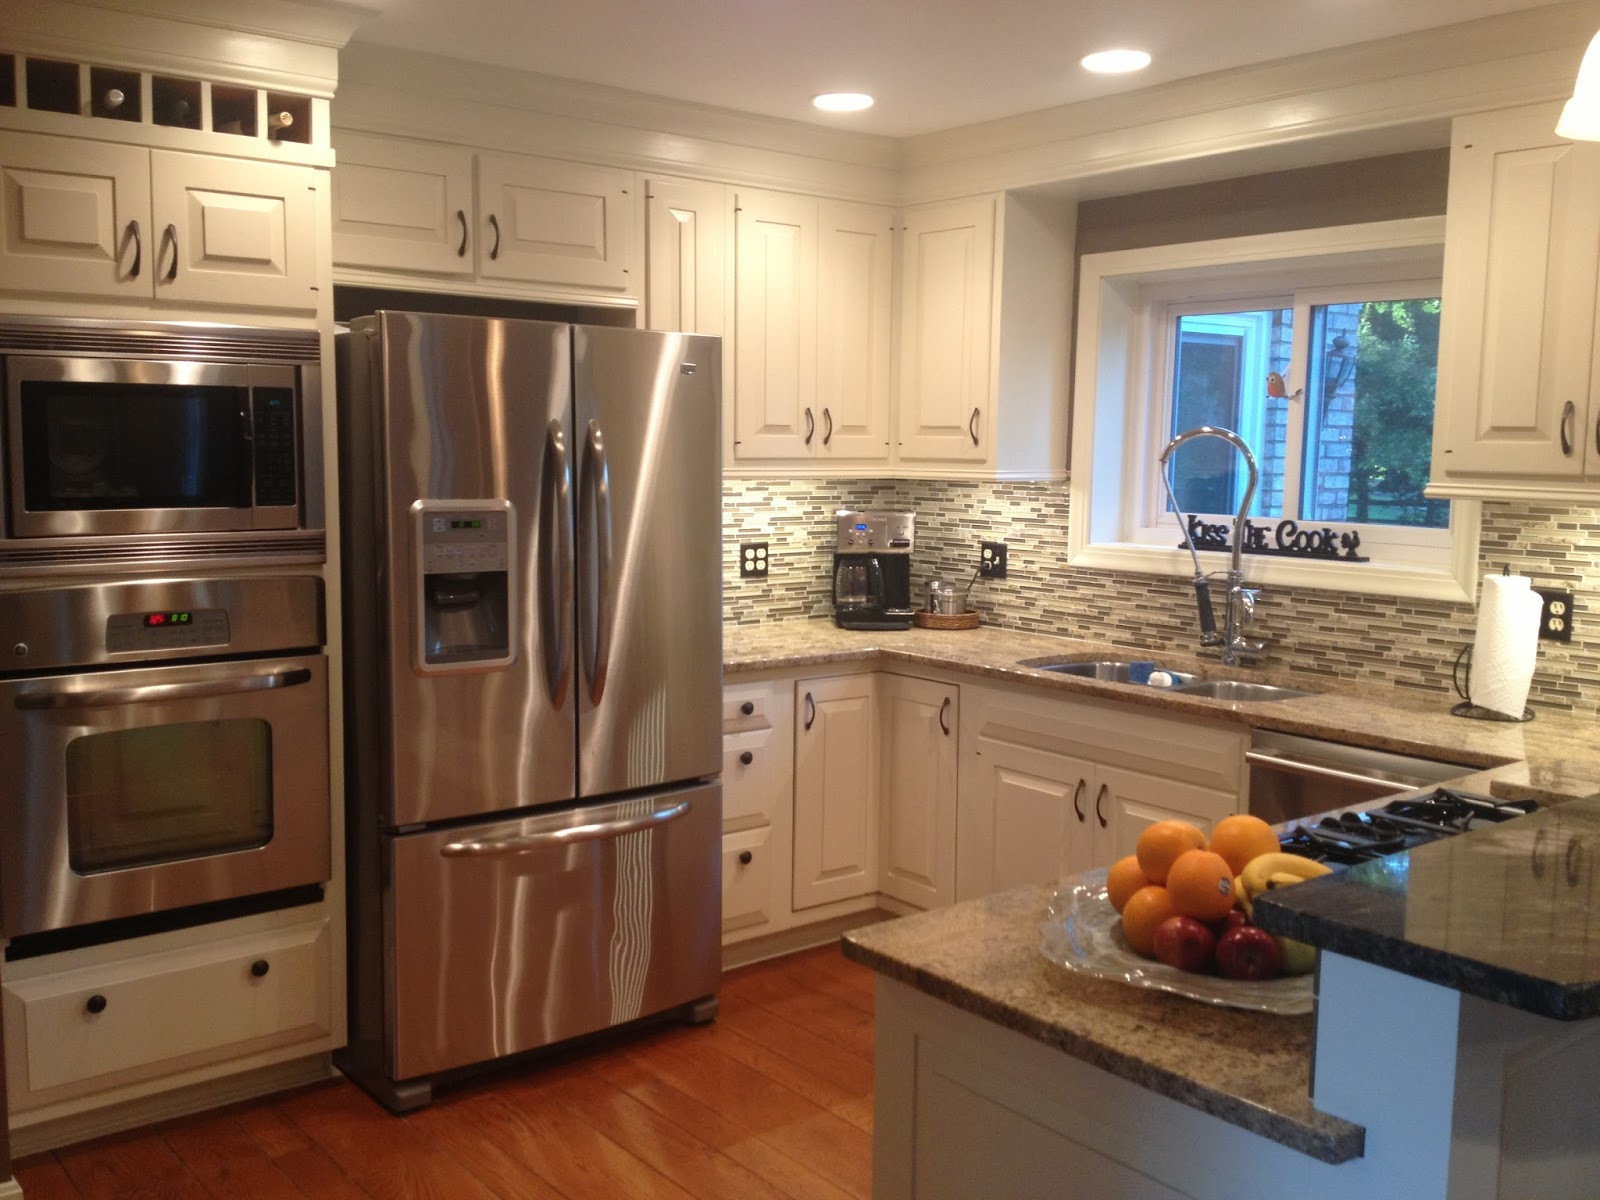 Remodeling Kitchen On A Budget
 Four Seasons Style The NEW kitchen remodel on a bud